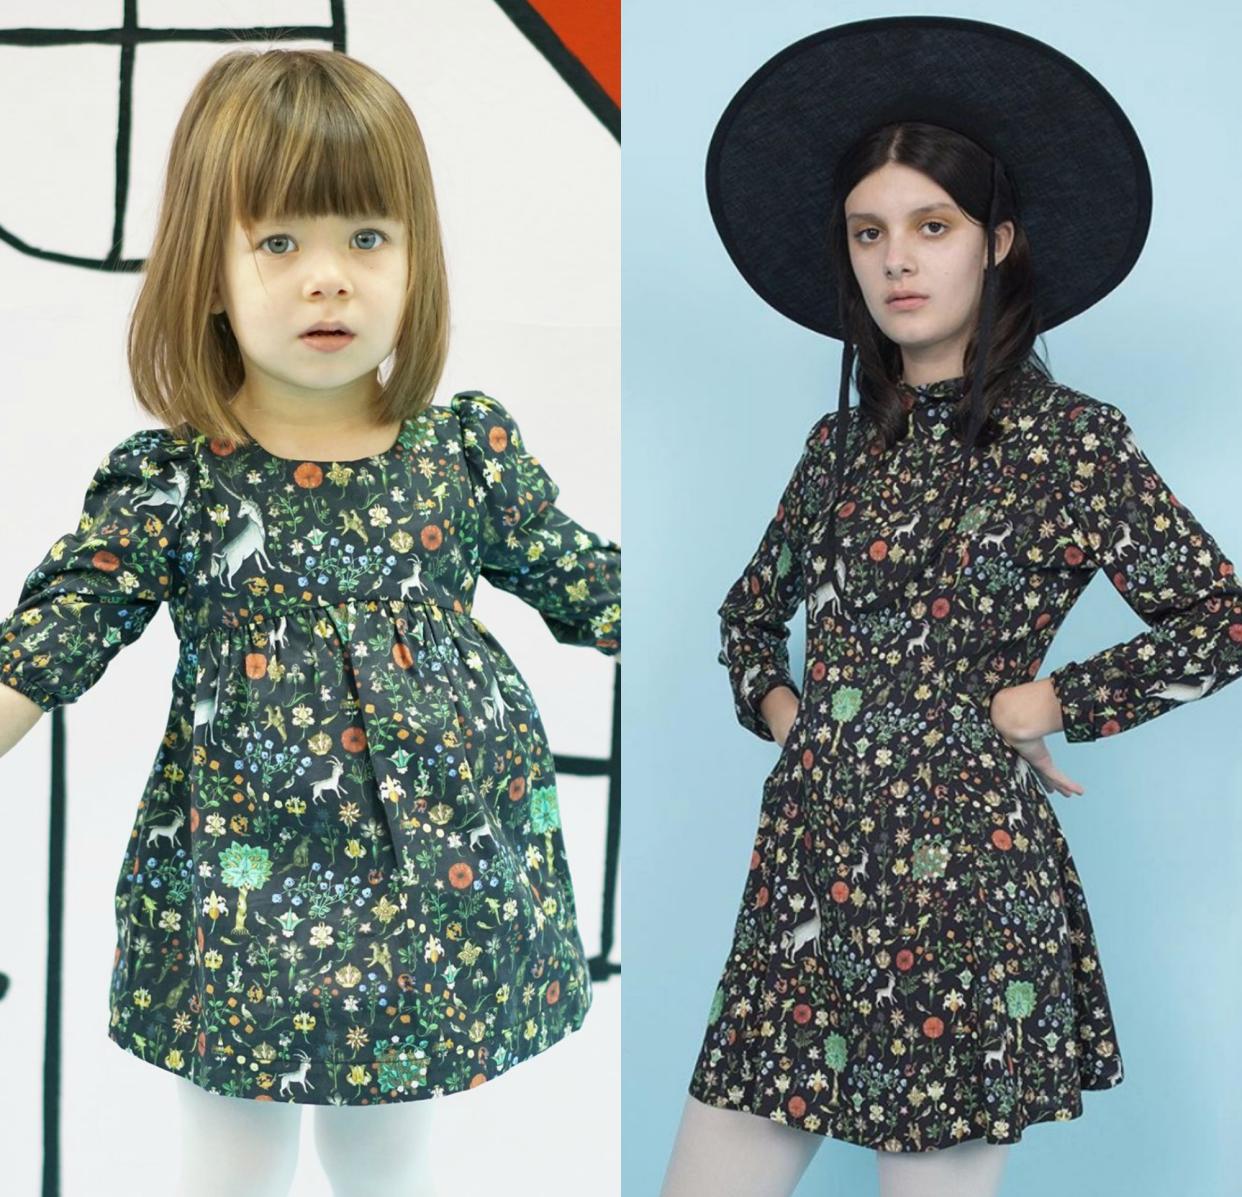 Samantha Pleet’s new kid’s line will let you be stylish twinsies with your mini-me